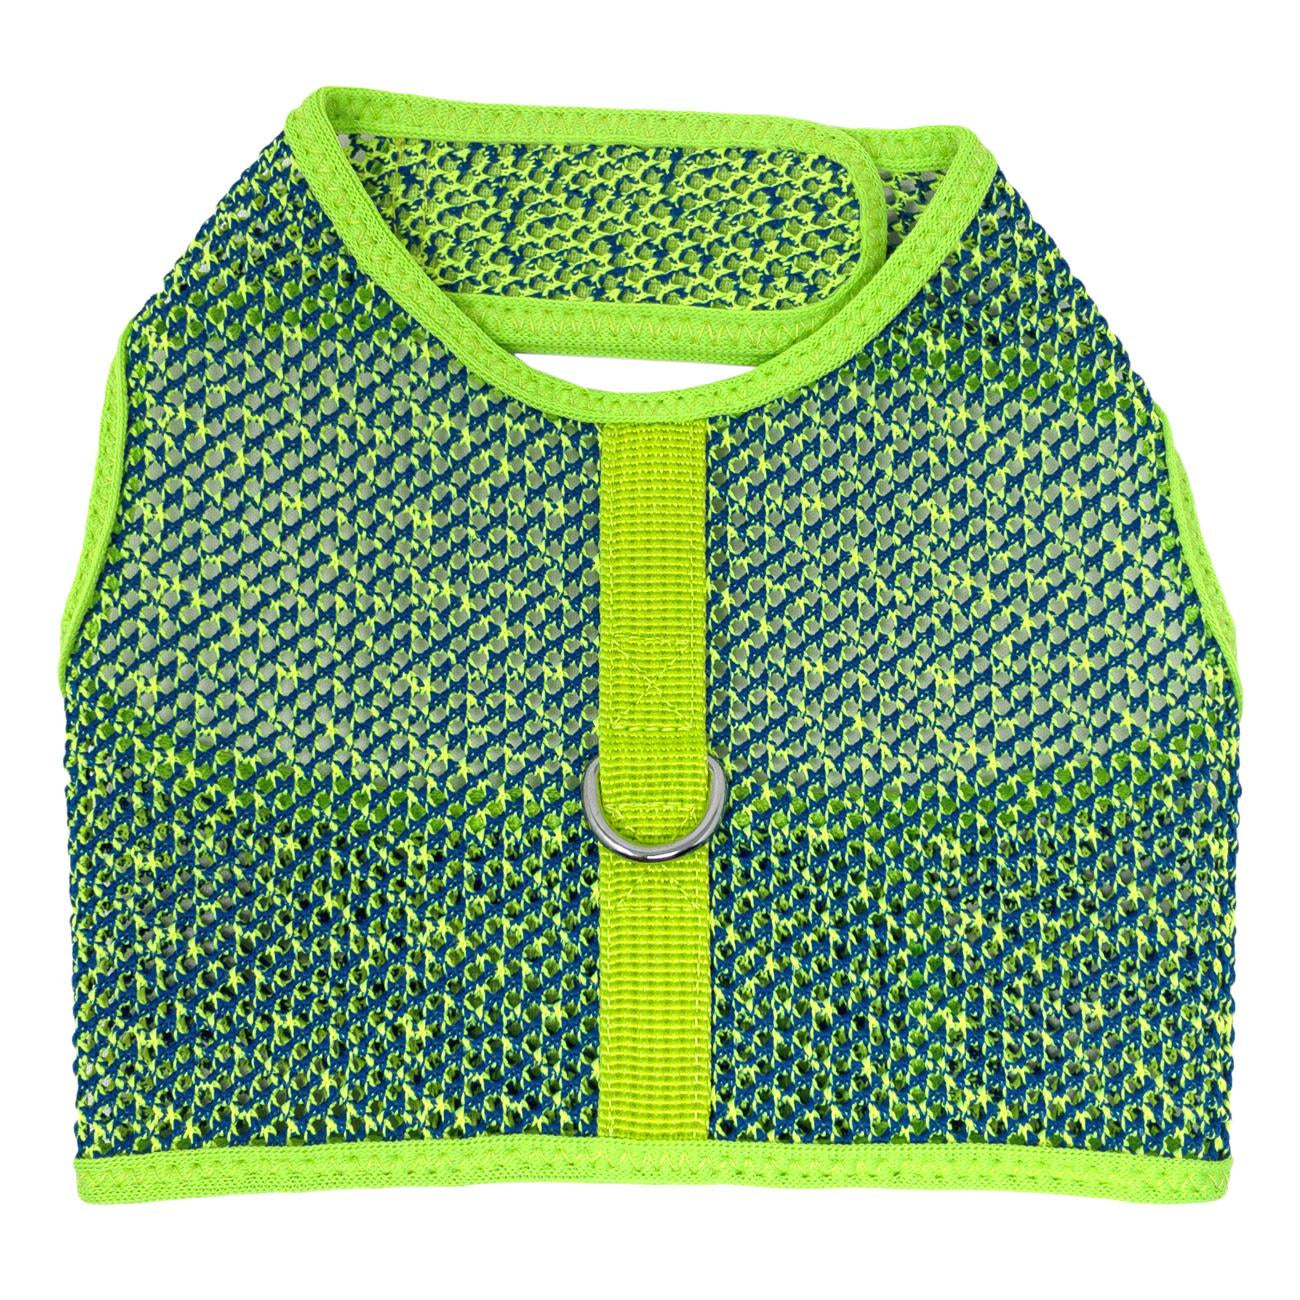 Active Mesh Dog Harness with Leash - Neon Green & Blue